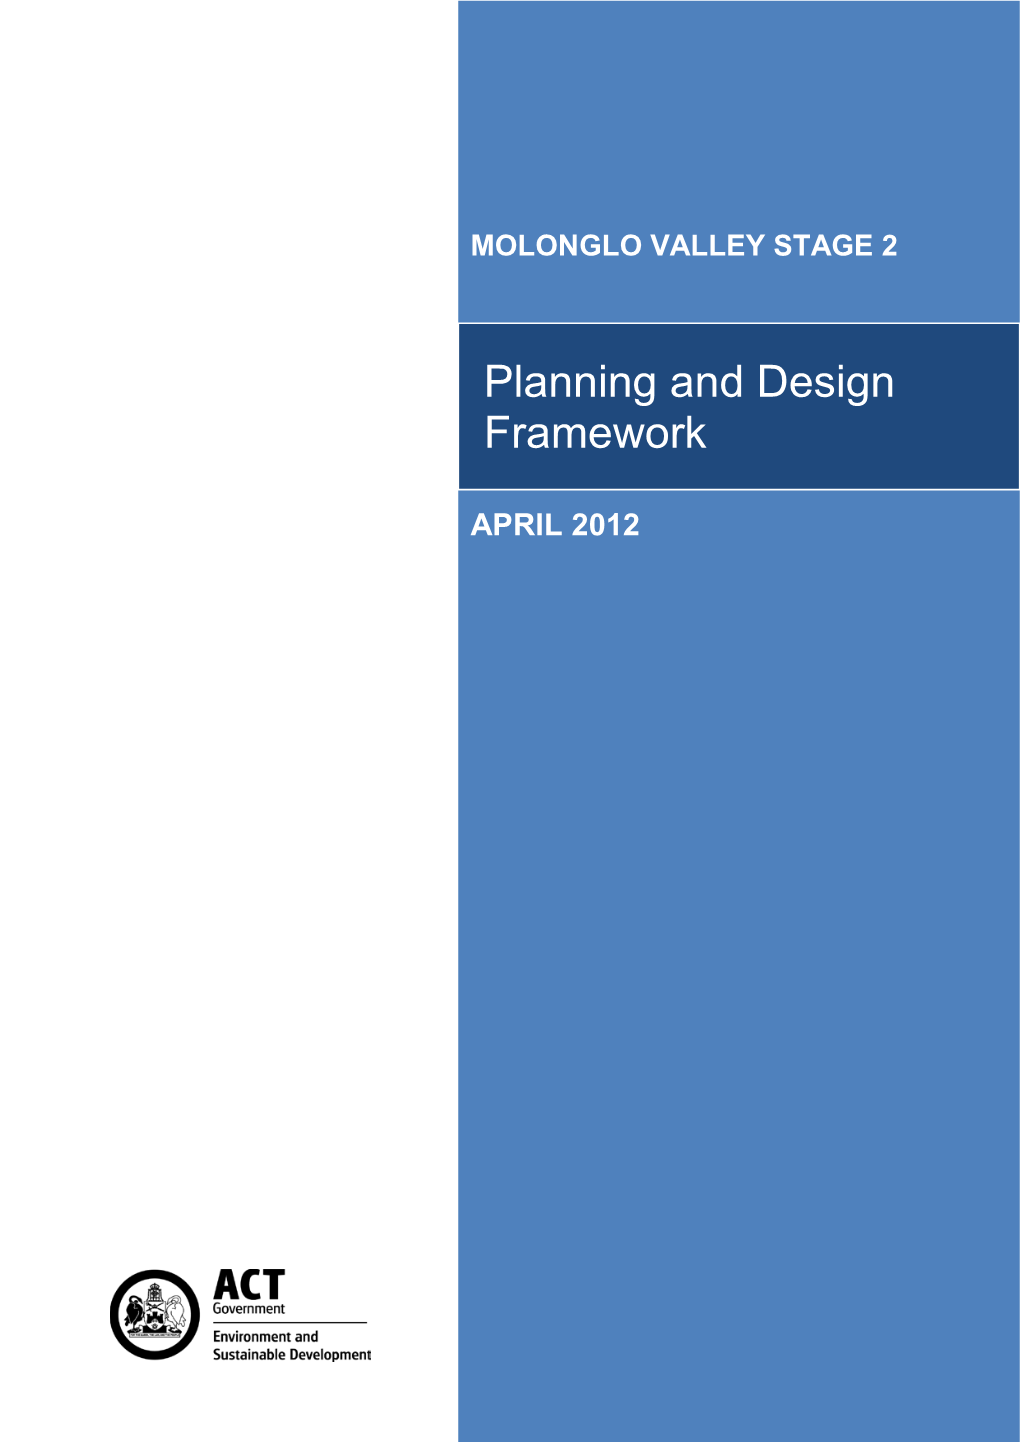 Molonglo Valley Stage 2 Planning And